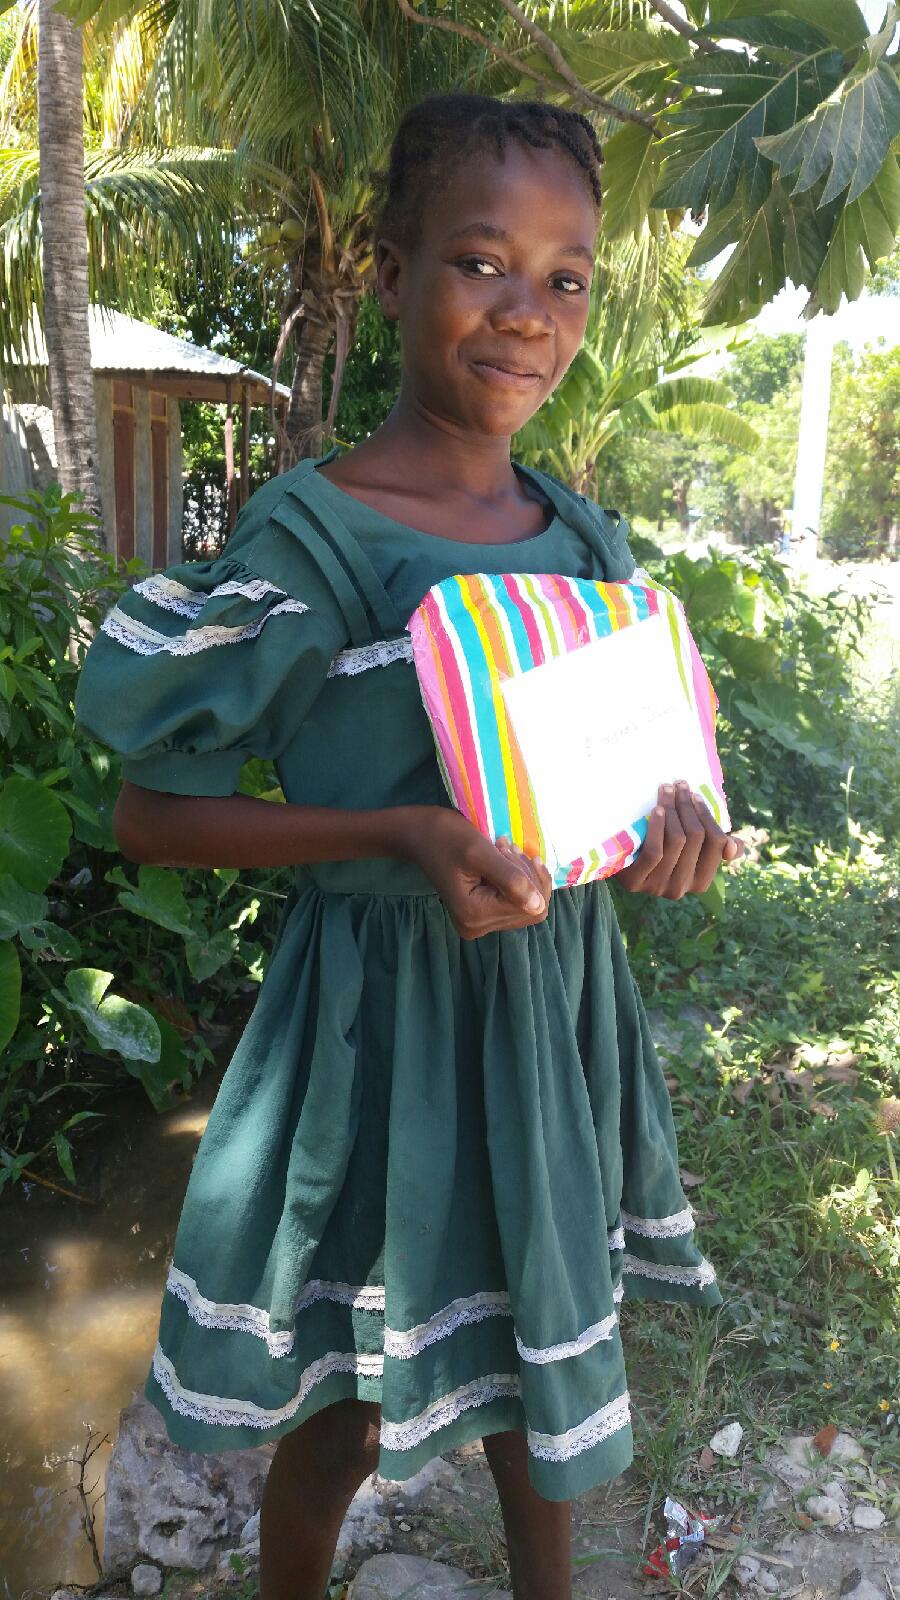 Elmires is delighted with her gift from her sponsor